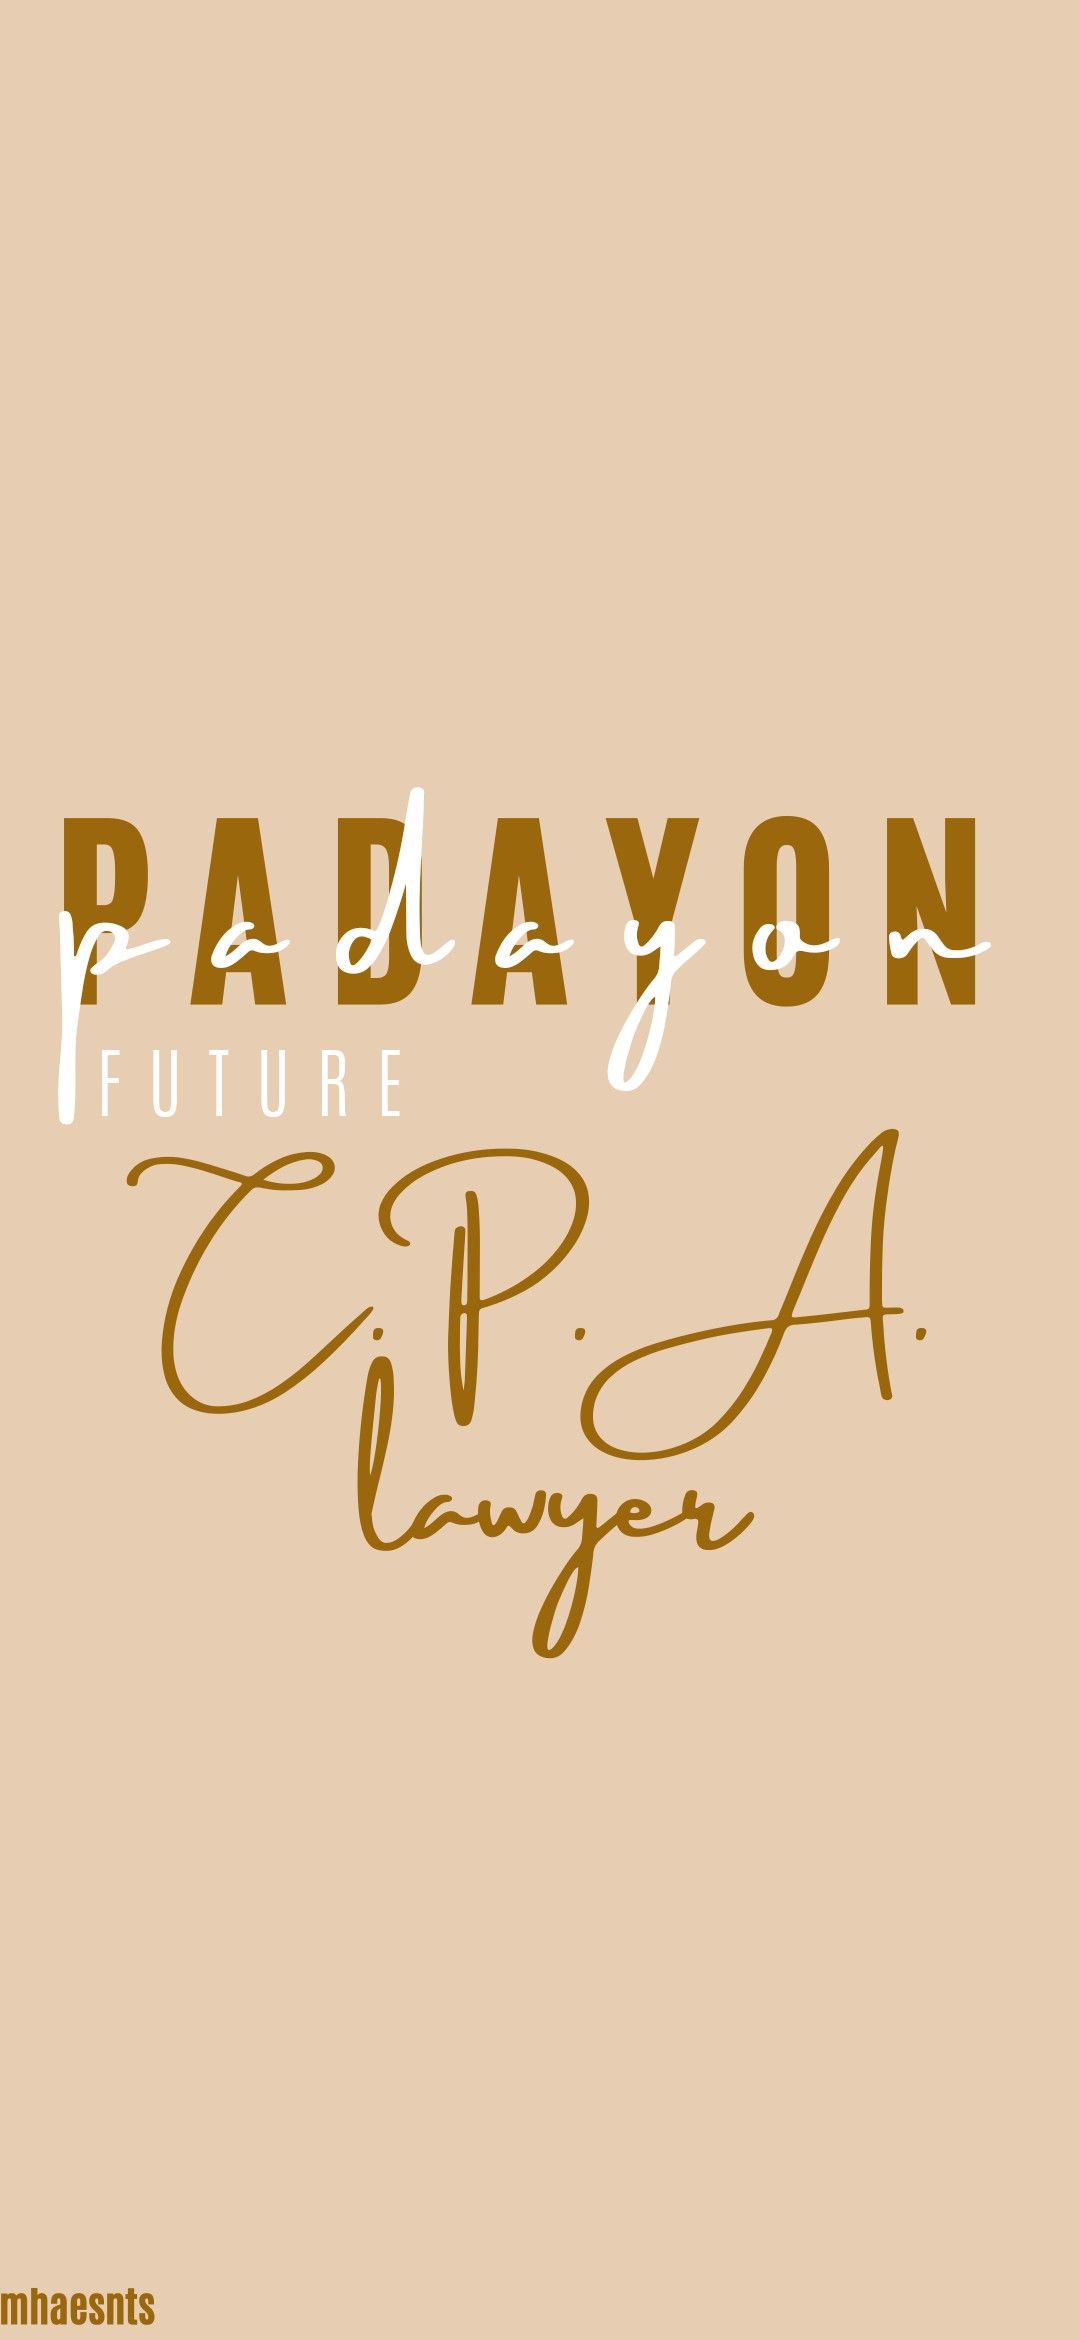 Padayon!!! Future CPA Lawyer. Future wallpaper, Cpa lawyer aesthetic, Study motivation quotes